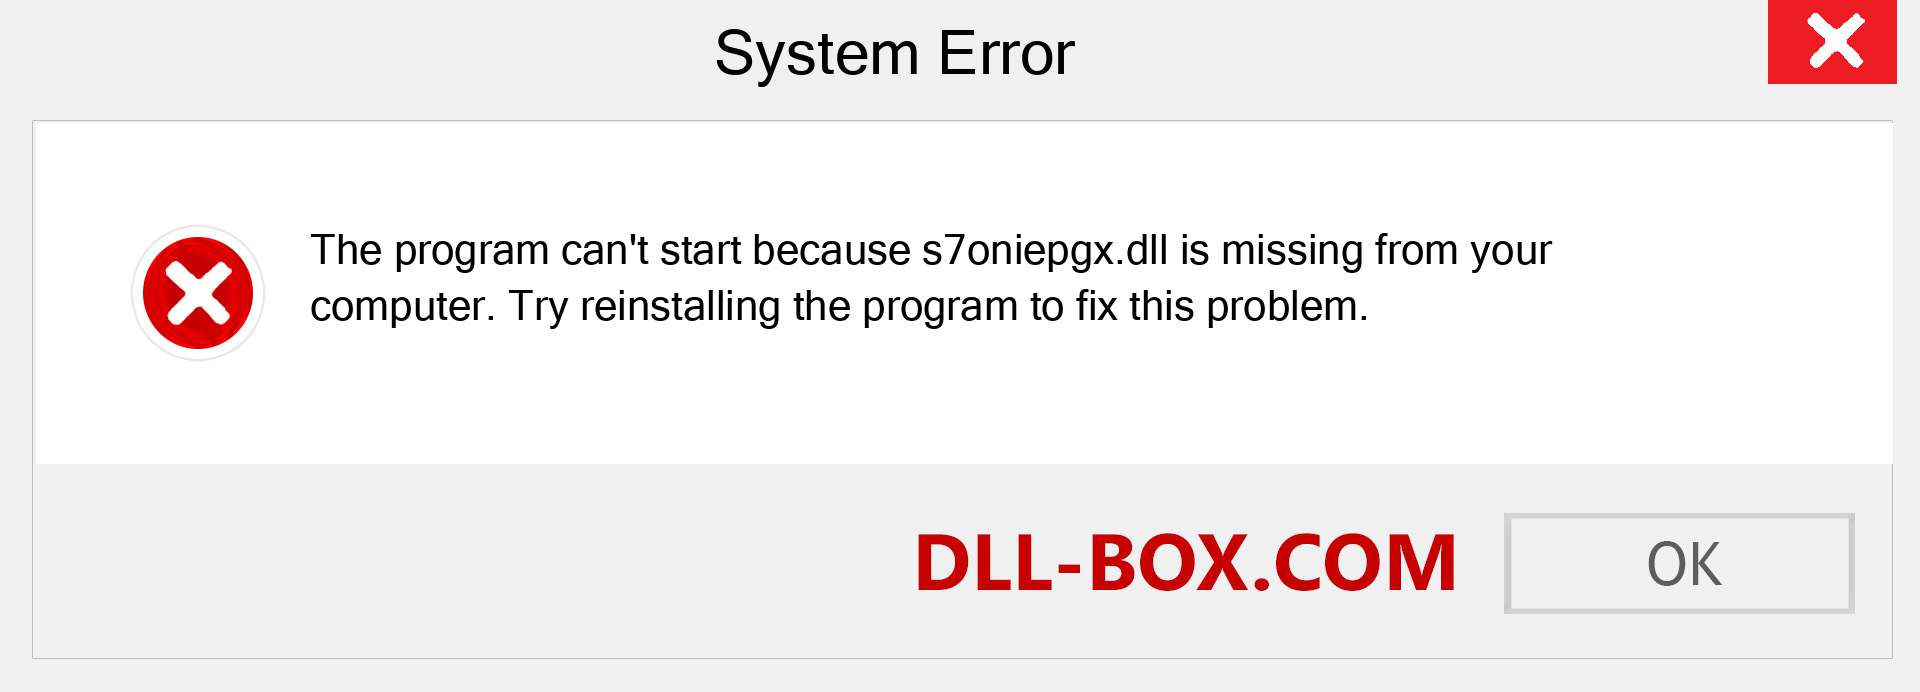  s7oniepgx.dll file is missing?. Download for Windows 7, 8, 10 - Fix  s7oniepgx dll Missing Error on Windows, photos, images